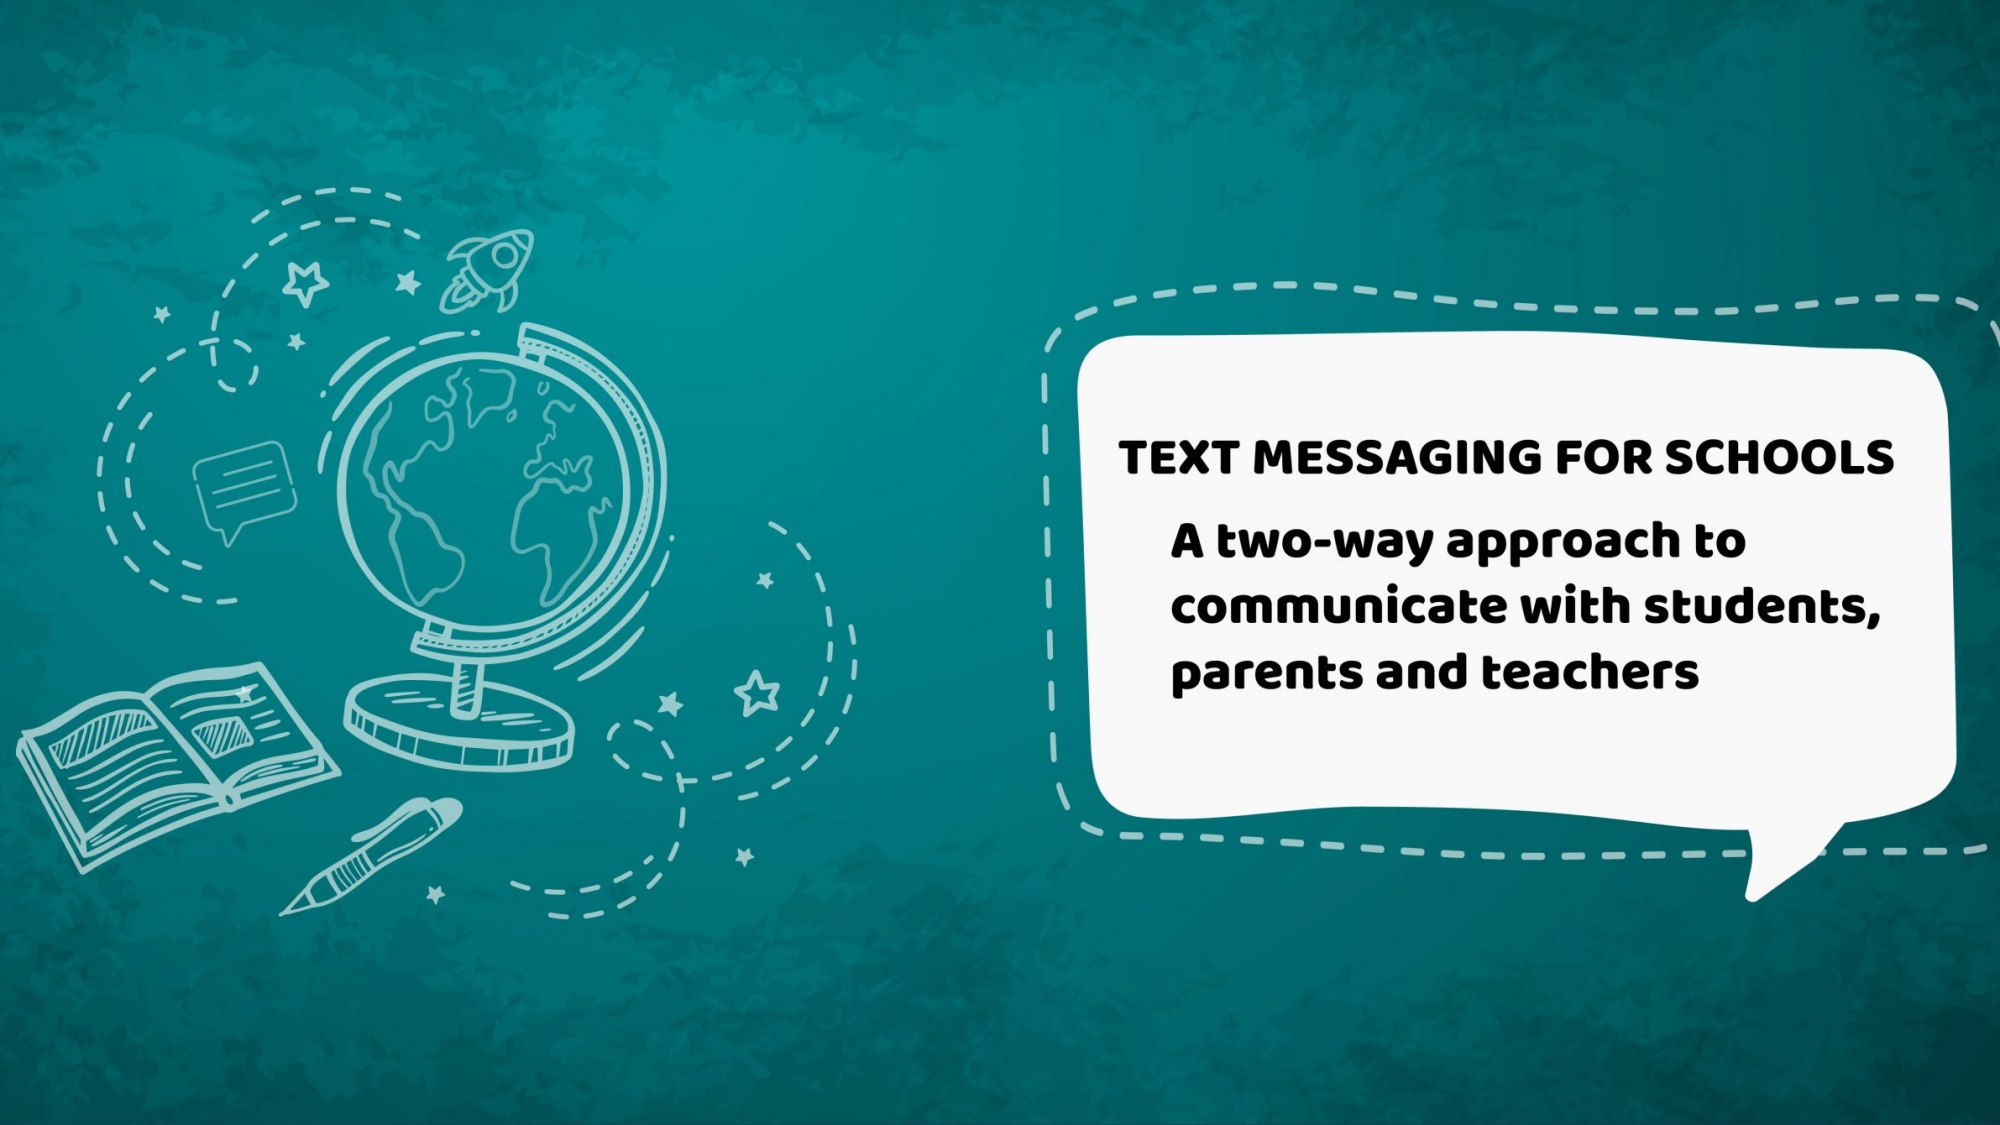 Text Messaging With attachments For Schools | Redtie